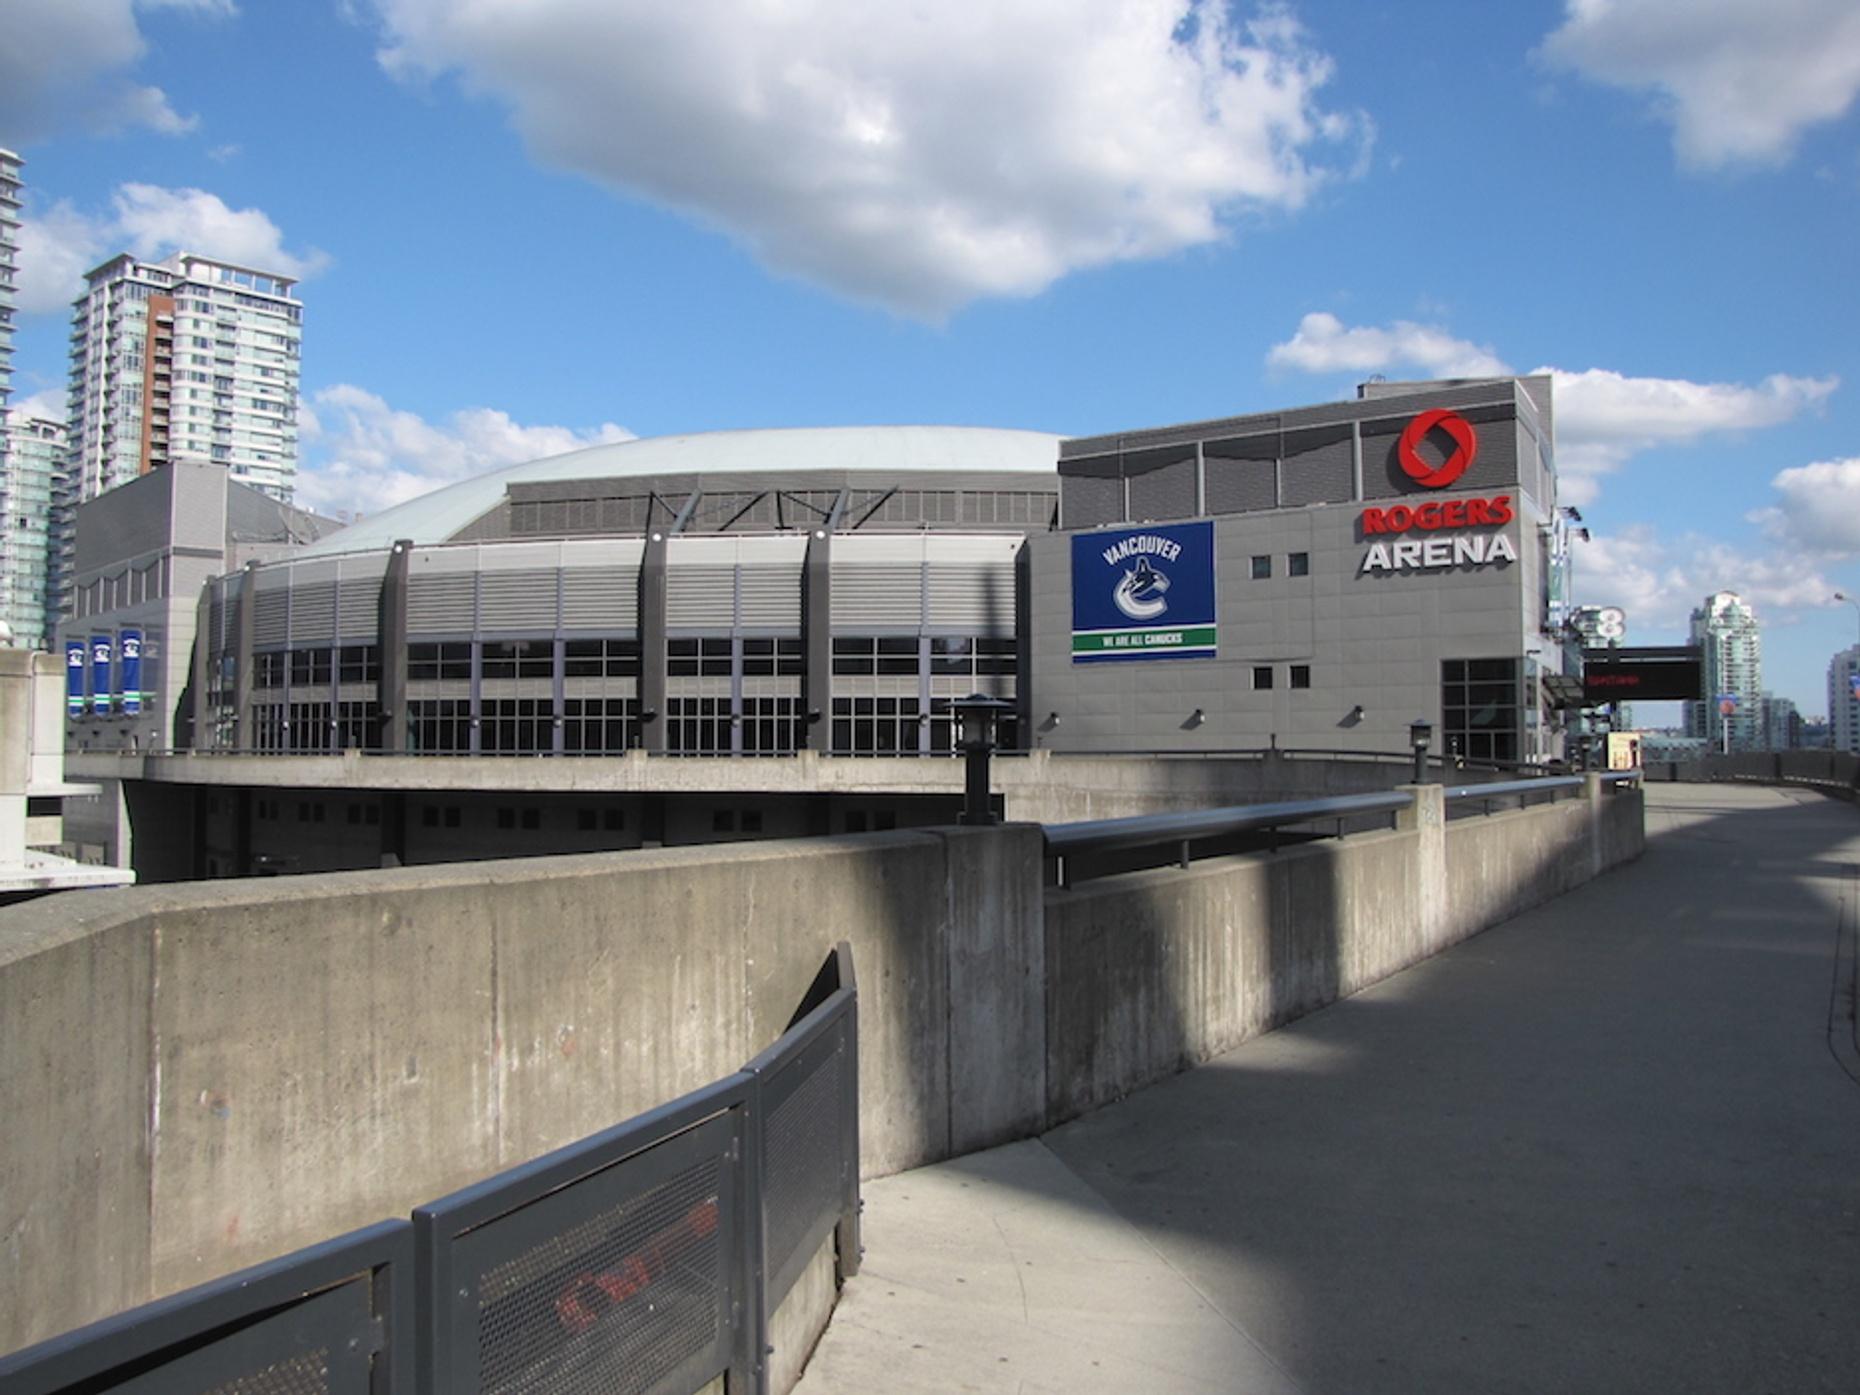 rogers arena tours vancouver